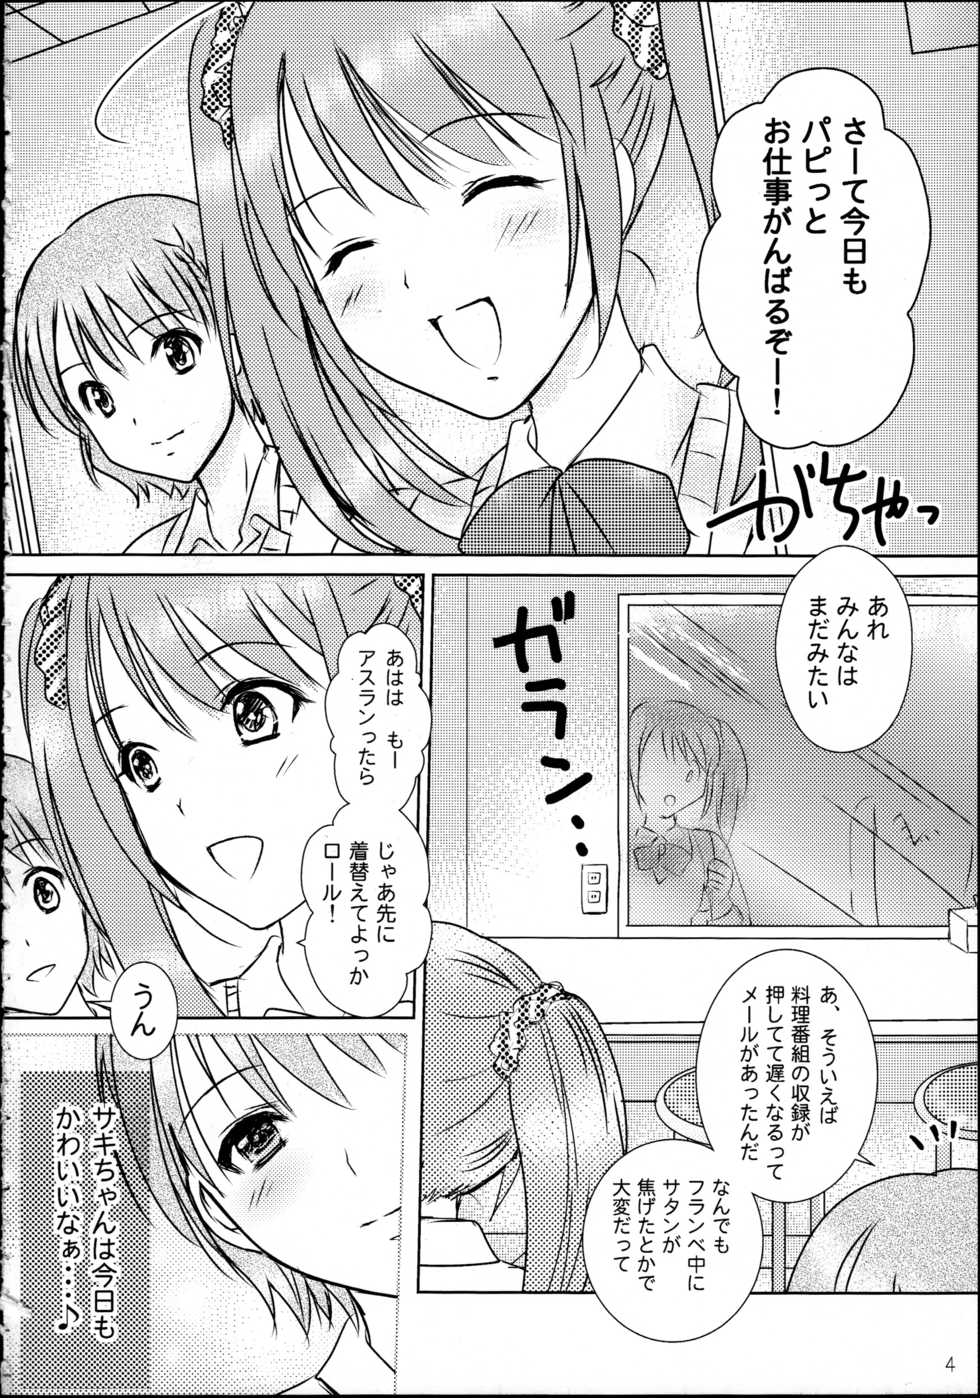 (C87) [MaSBeYaAKT@AbiOgeneTic melodY Kiss (MaSBe Akyto)] You're my special sweetest cake! (THE IDOLM@STER SideM) - Page 3